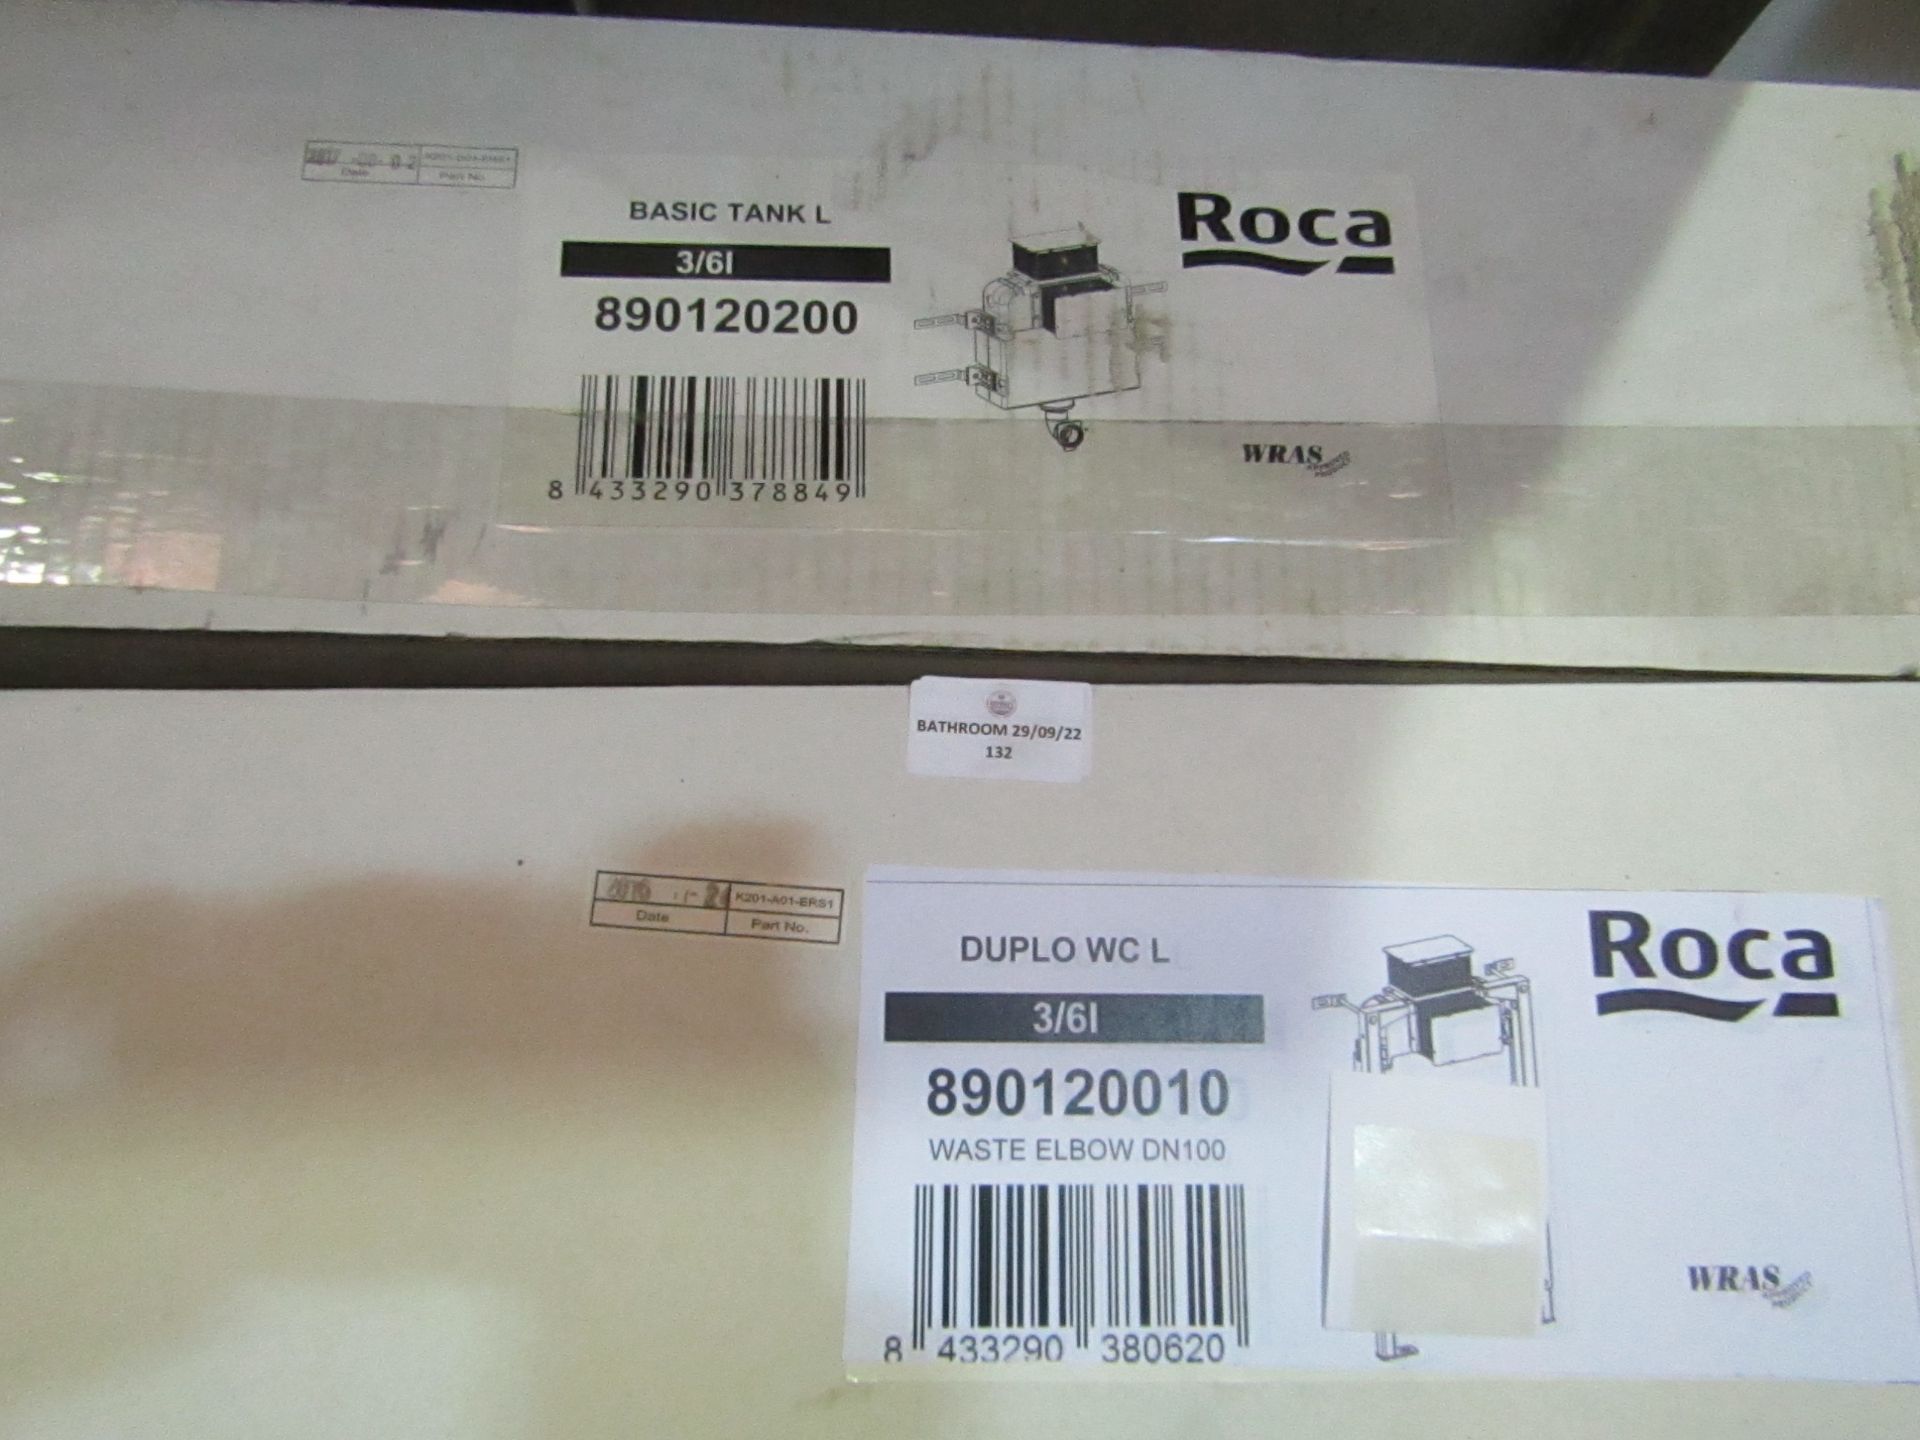 1x Roca - Duplo WC Frame with Dual Flush Cistern for Wall Hung Toilets - Unchecked & Boxed. - Paired